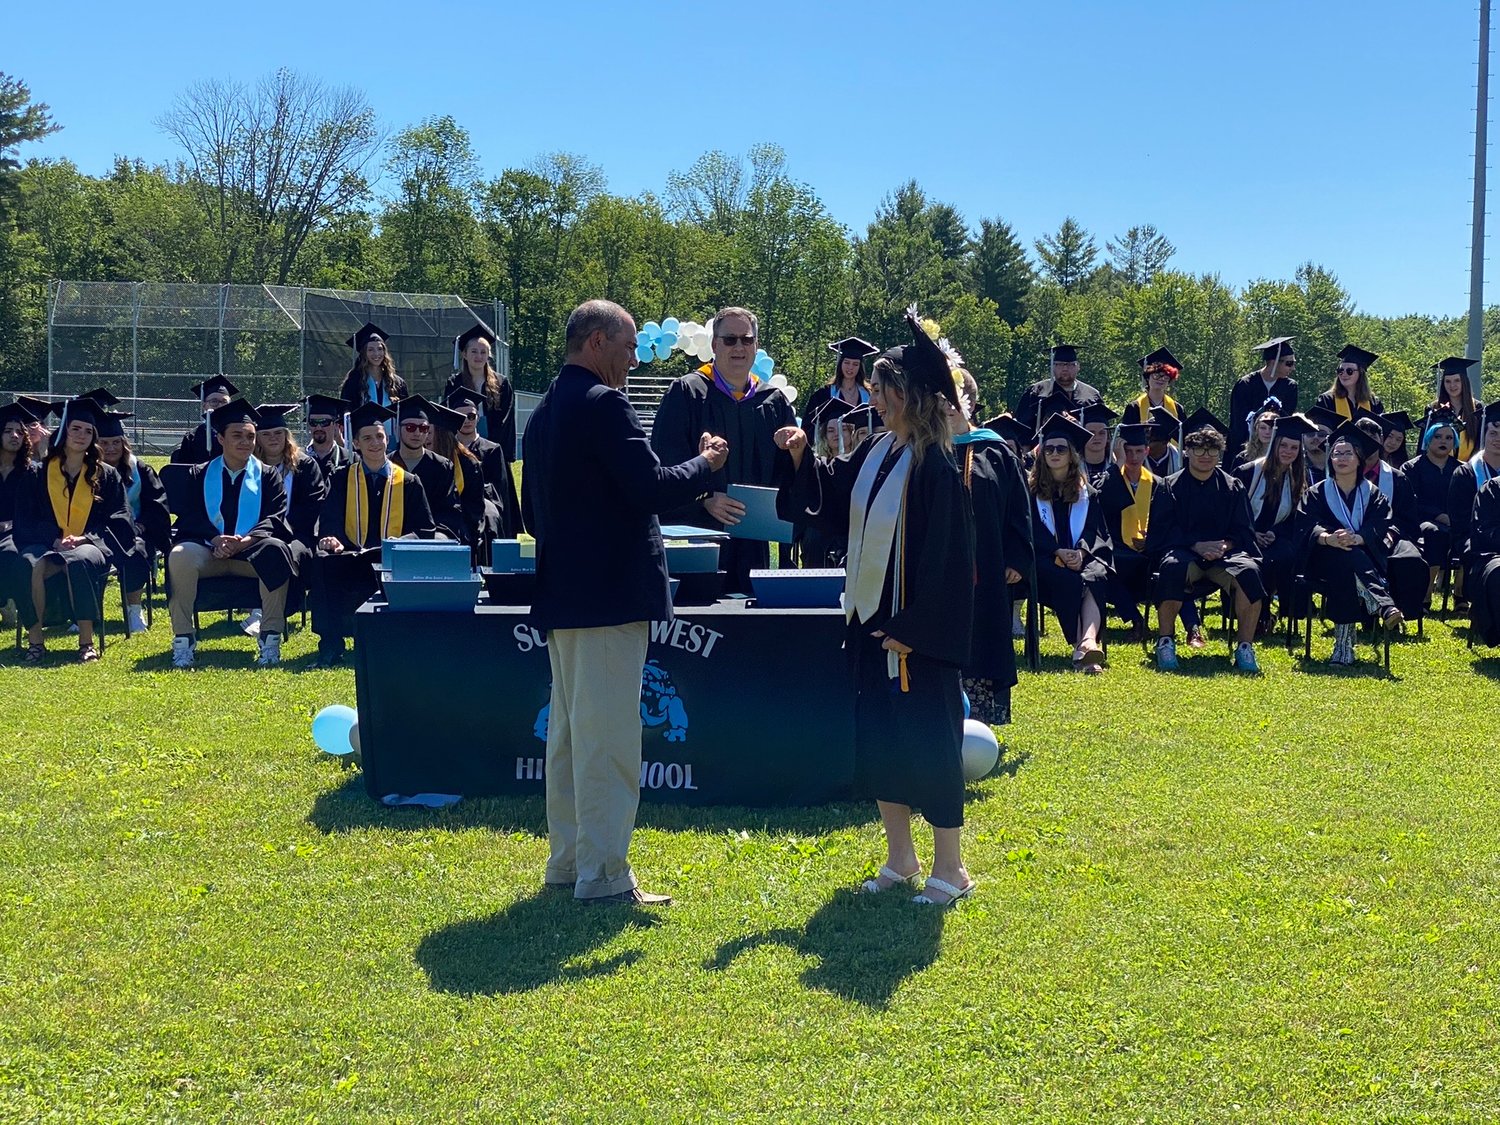 Ken Cohen, school board member, doing a special handshake with his daughter, Gabrielle Cohen, before presenting her diploma.